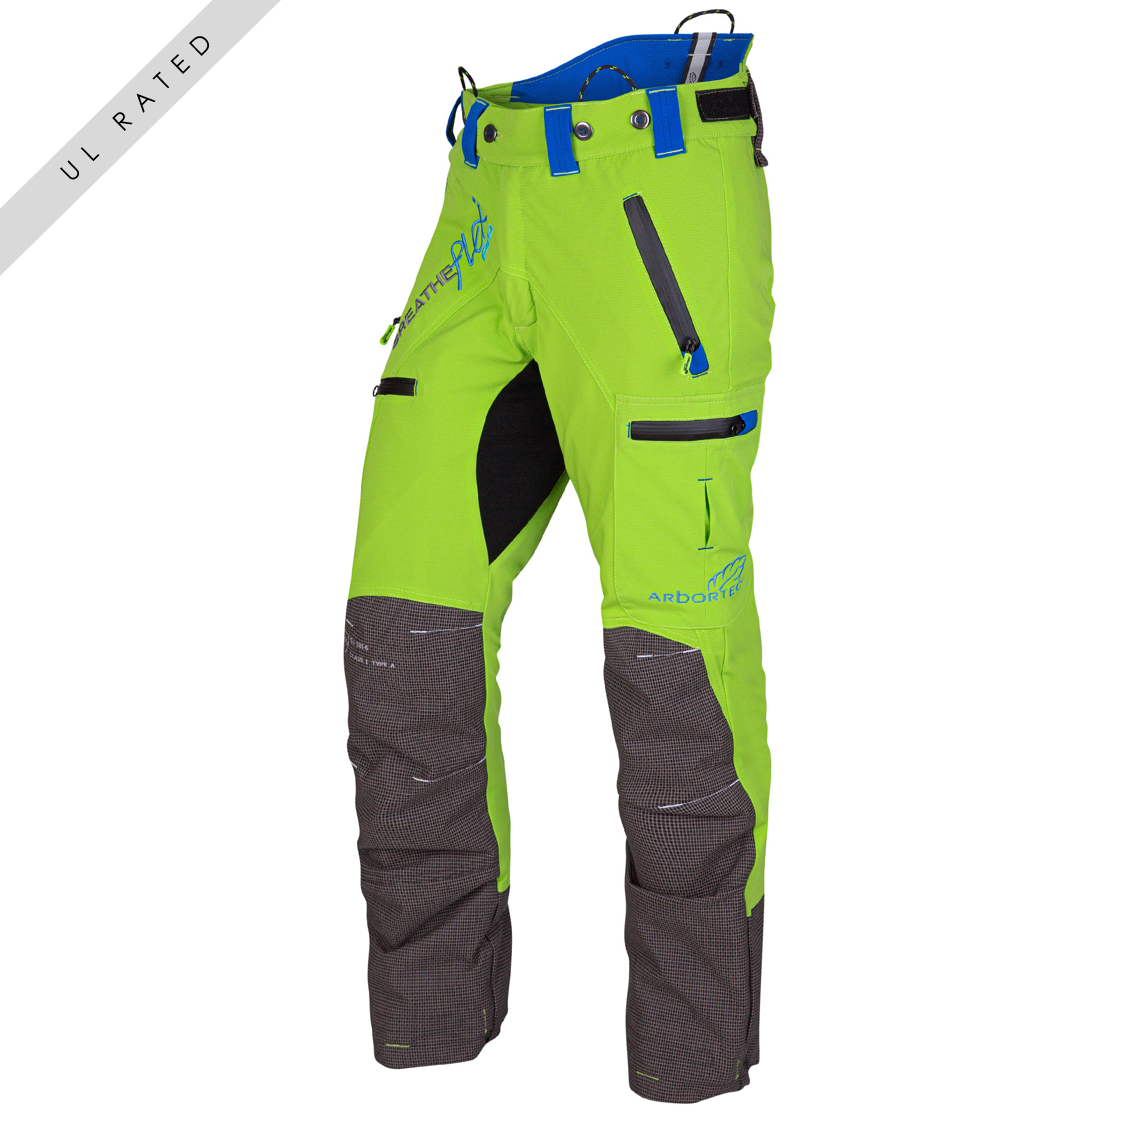 AT4060(US) Breatheflex Pro Chainsaw Trousers UL Rated - Lime